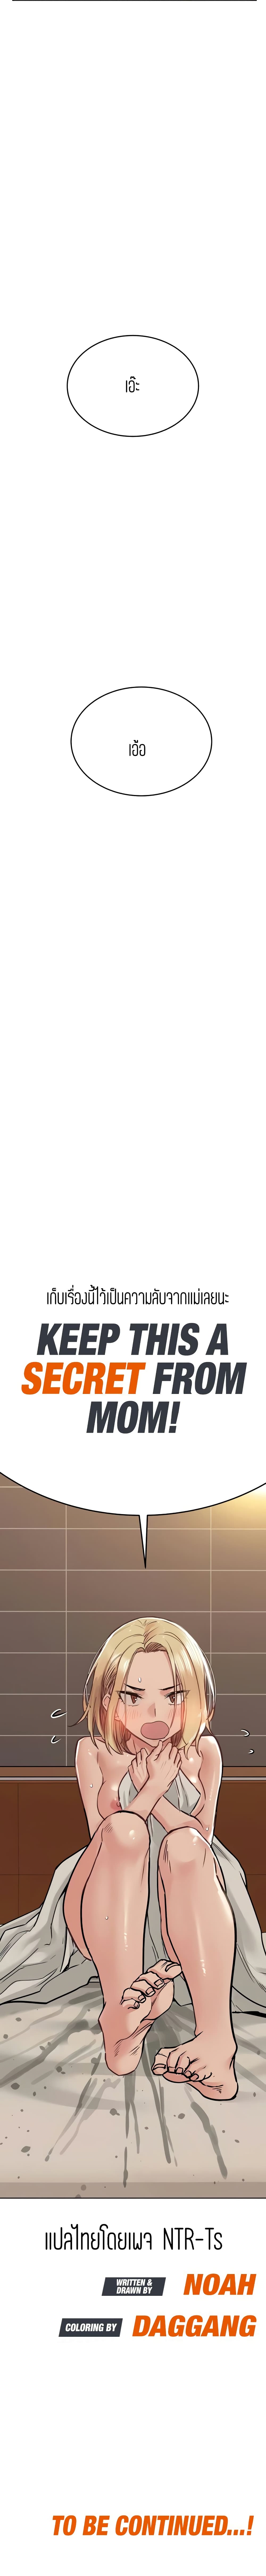 Keep it A Secret from Your Mother! 24 20